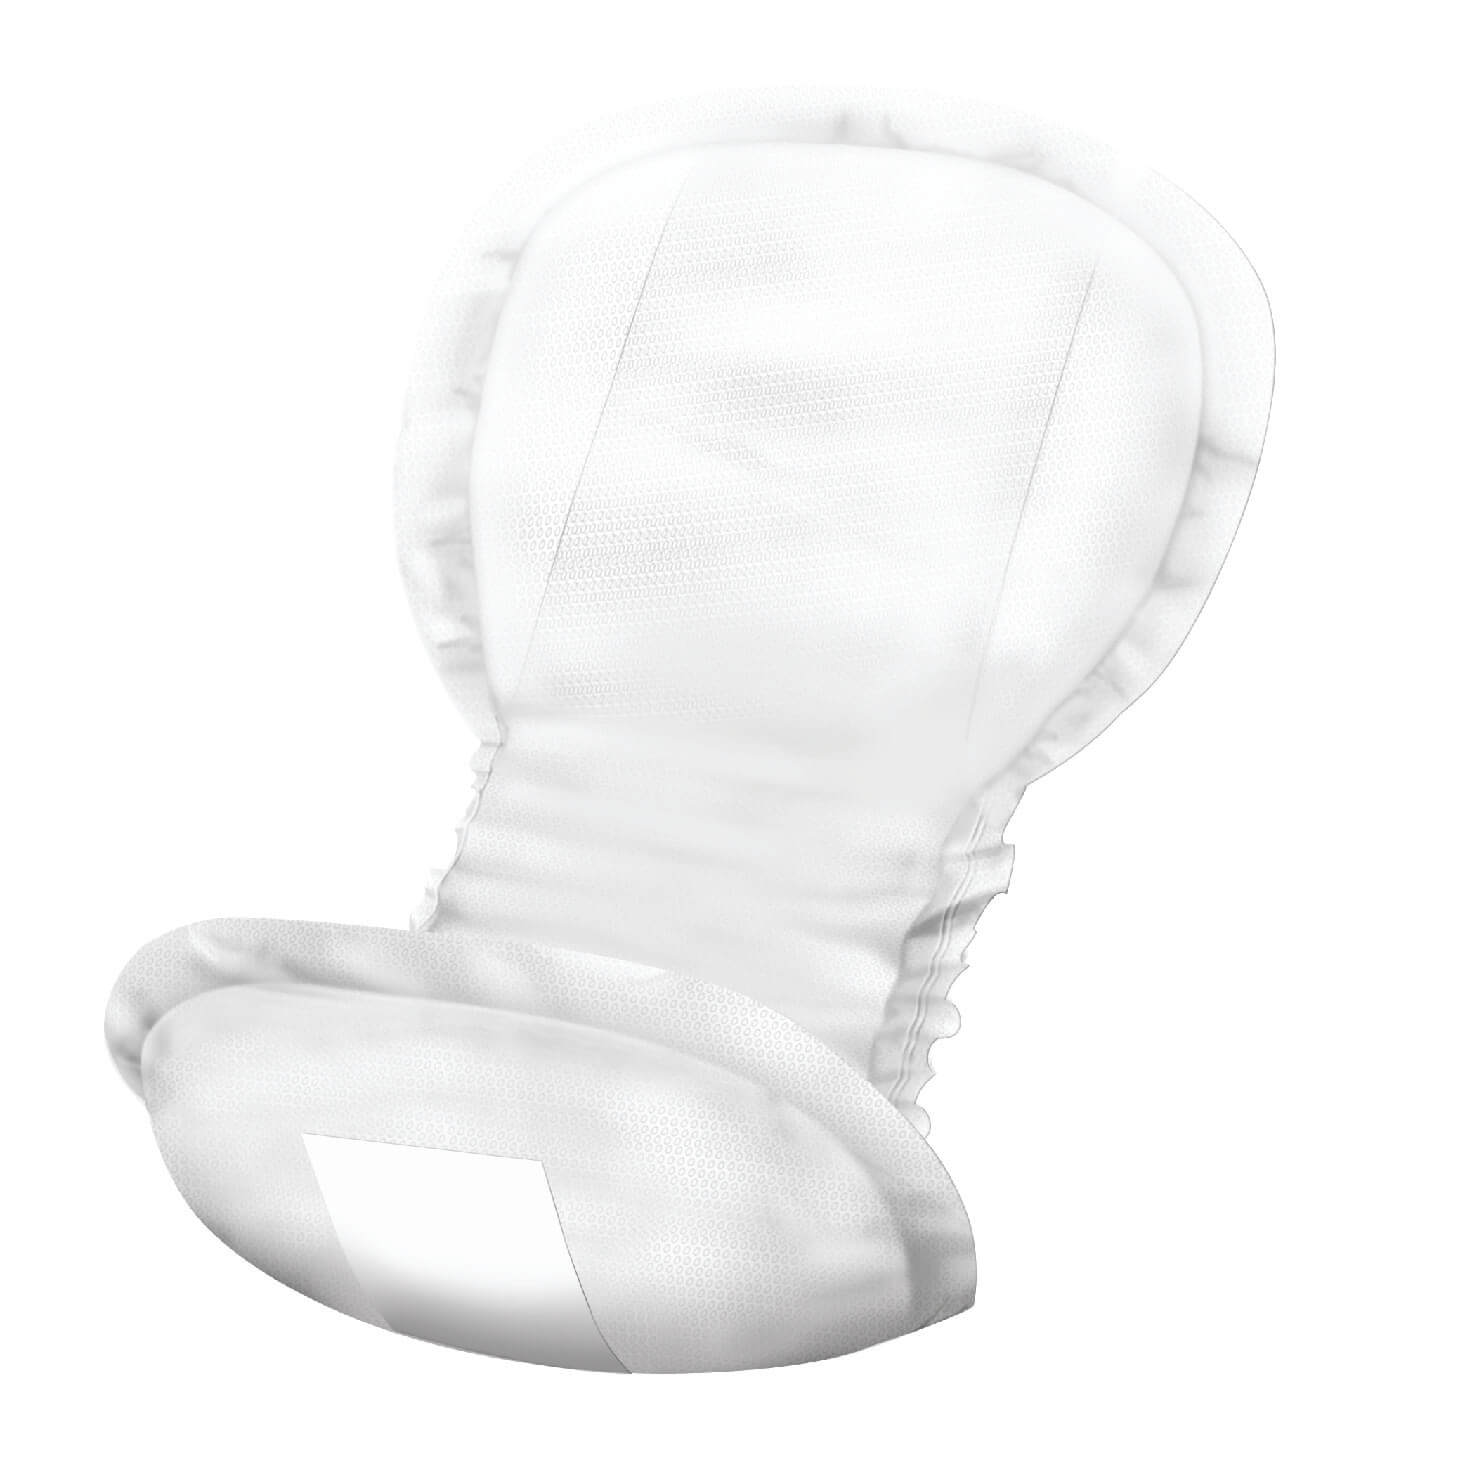 Intimate Maternity Pad 20 Counts Online at Best Price, Sanpro Pads